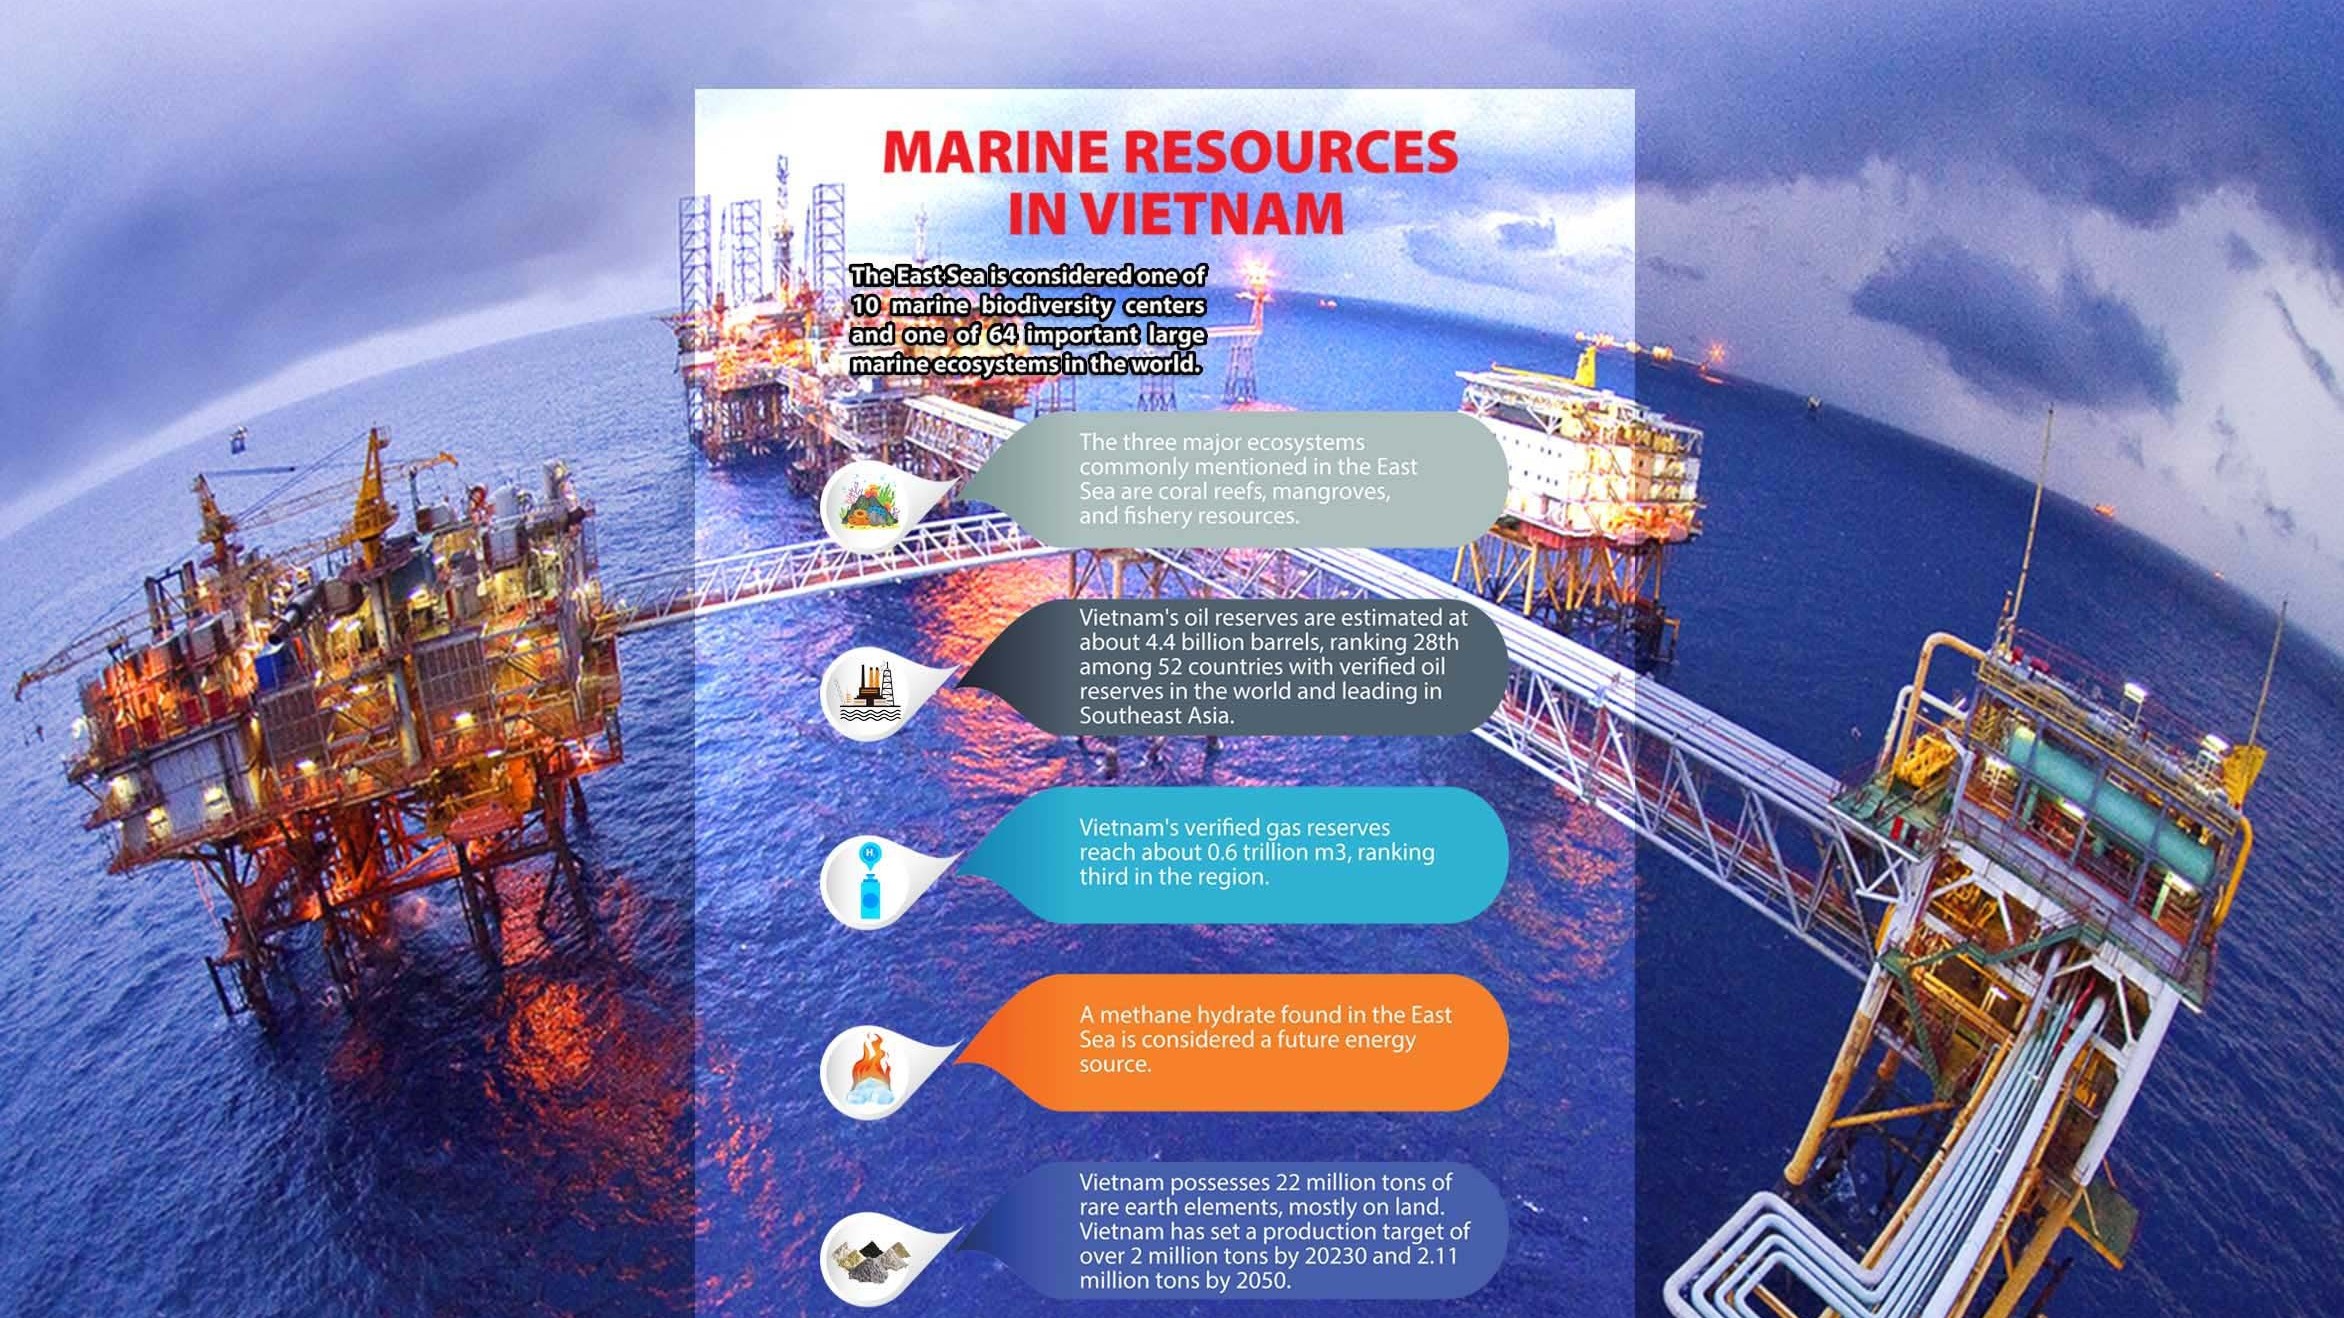 Marine resources in Vietnam and major issues